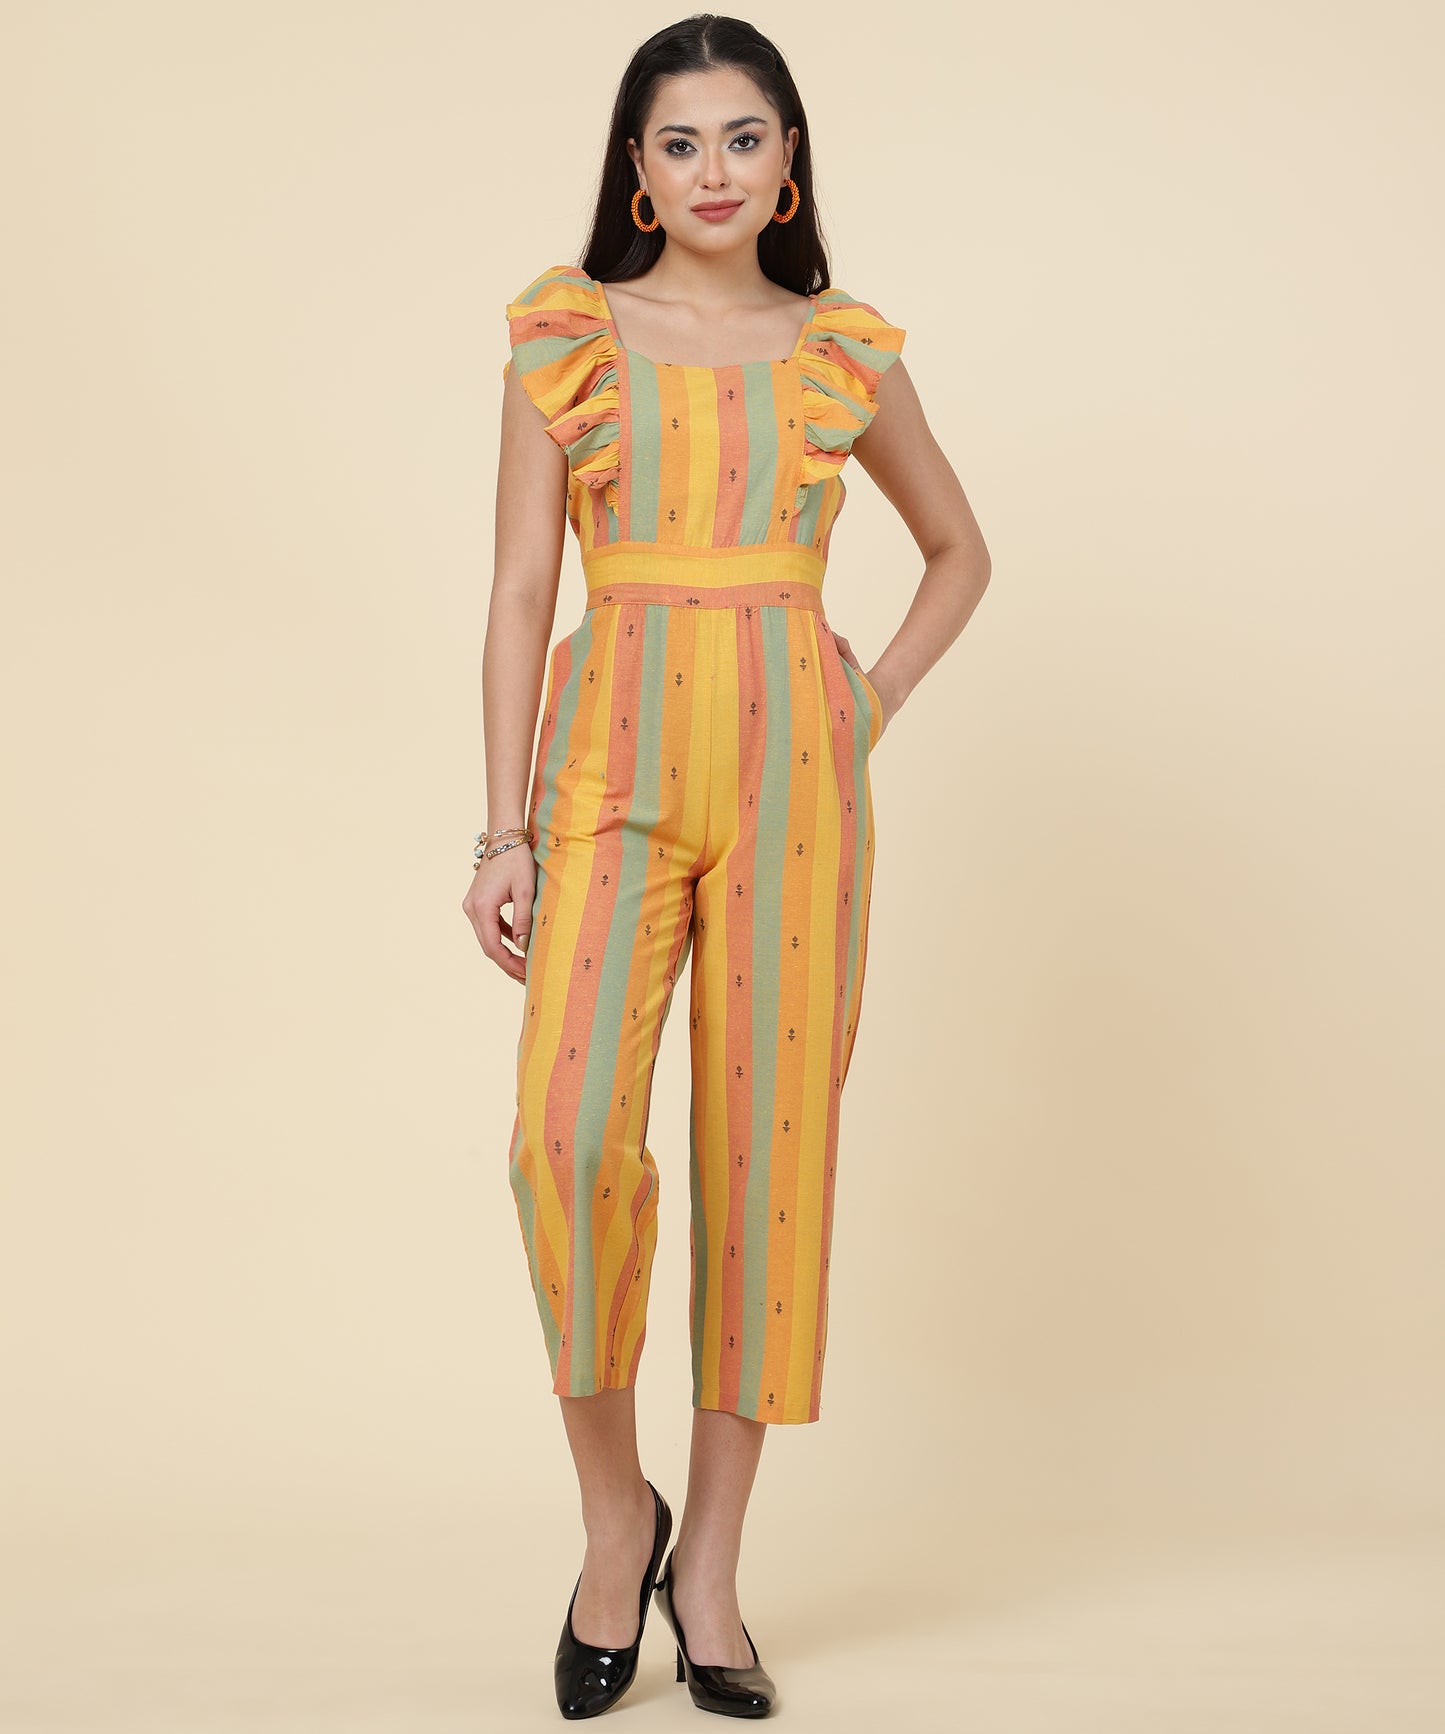 ANUSHIL Multicoloured Striped Jumpsuit for Women - Ruffle Sleeves, Ankle Length Jumsuit for Girls - Woven Cotton Fabric With Square Neck Style(Yellow)